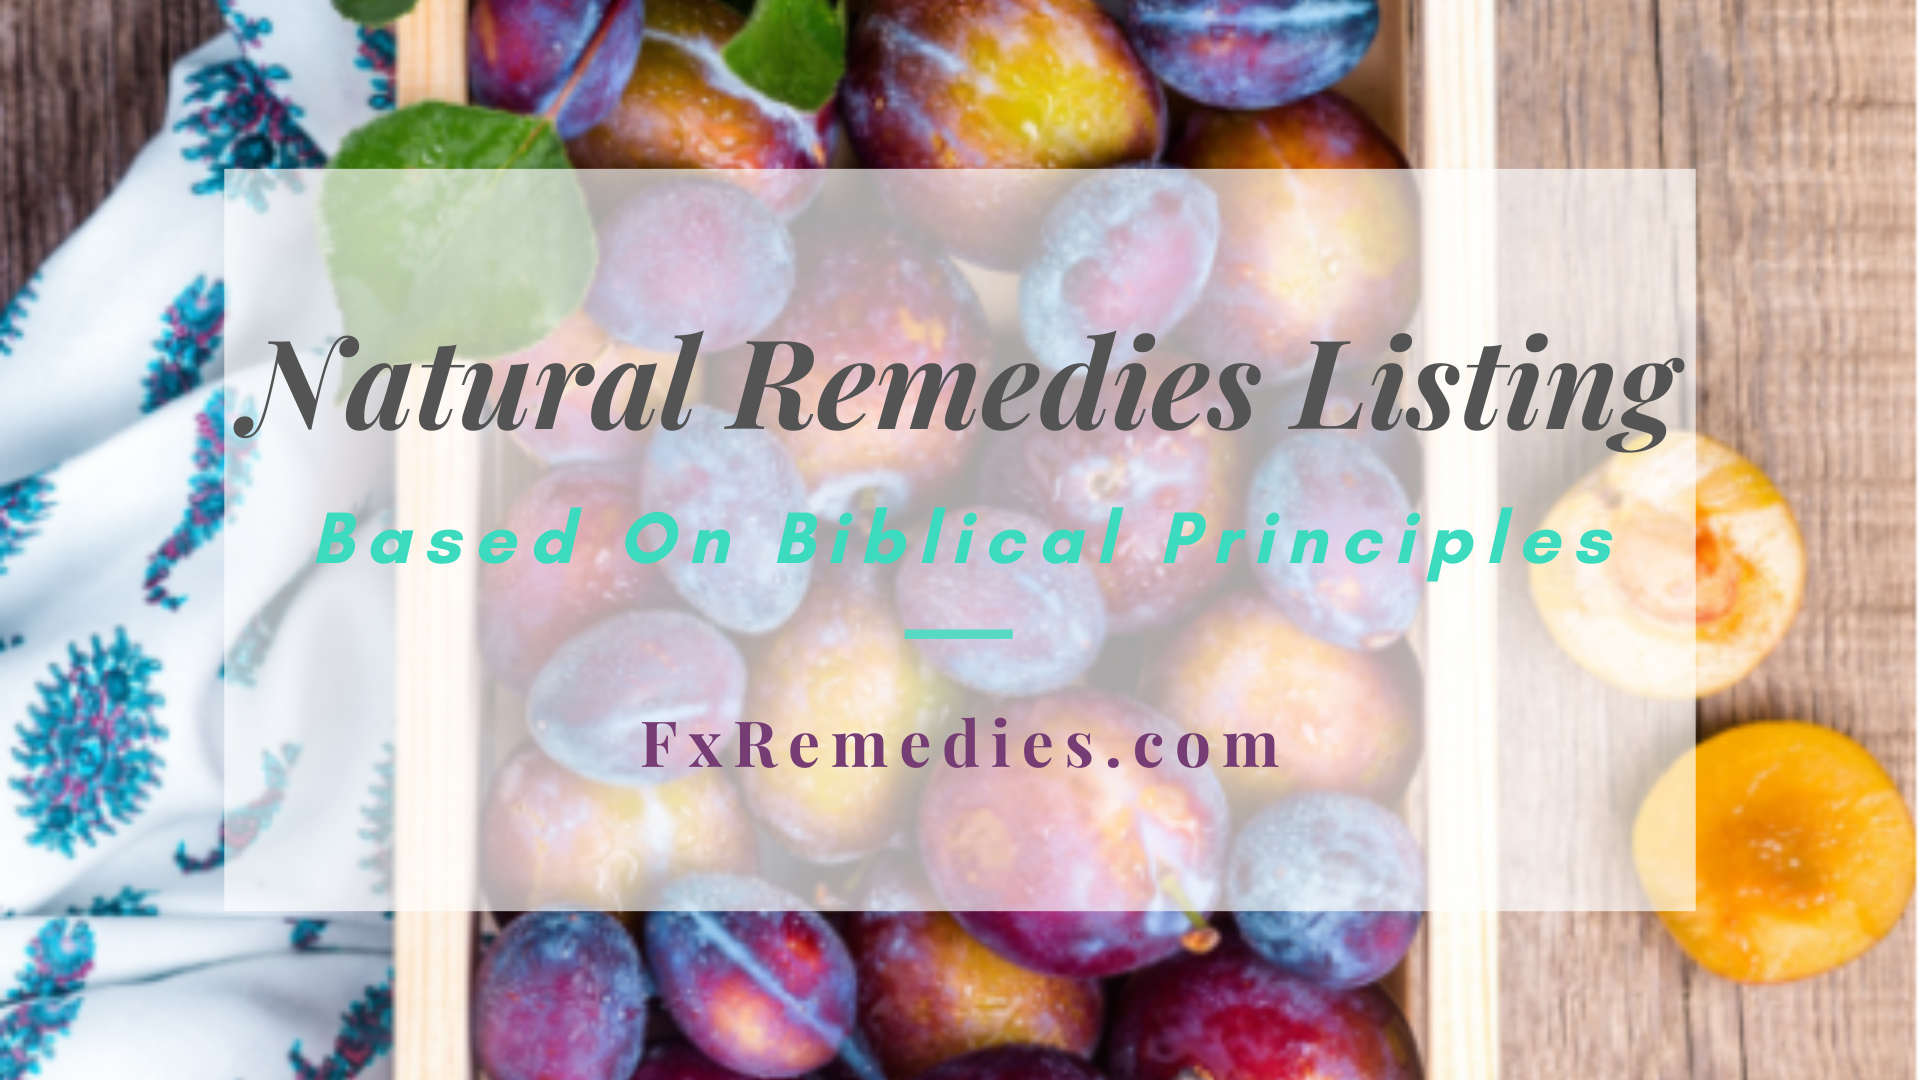 Natural remedies can be found in the Bible and we can discern through studying the natural health principles discussed in God’s word and learn his will for our health.